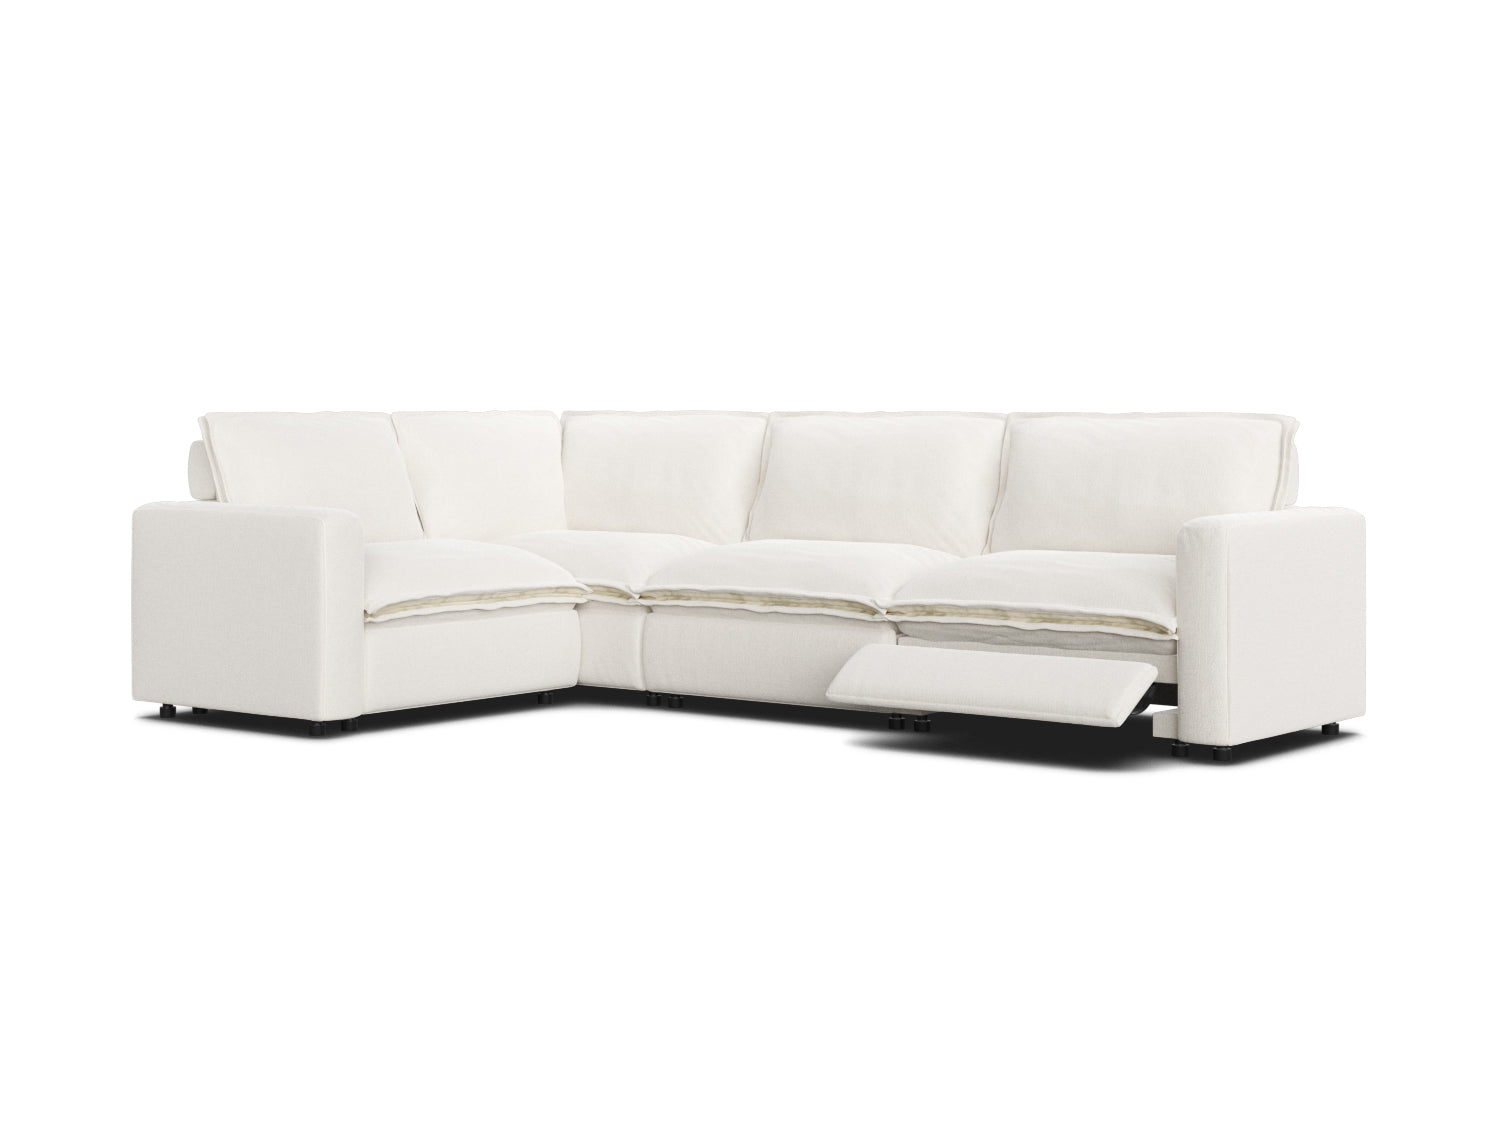 Sectional couch in white linen with one recliner, L-shaped